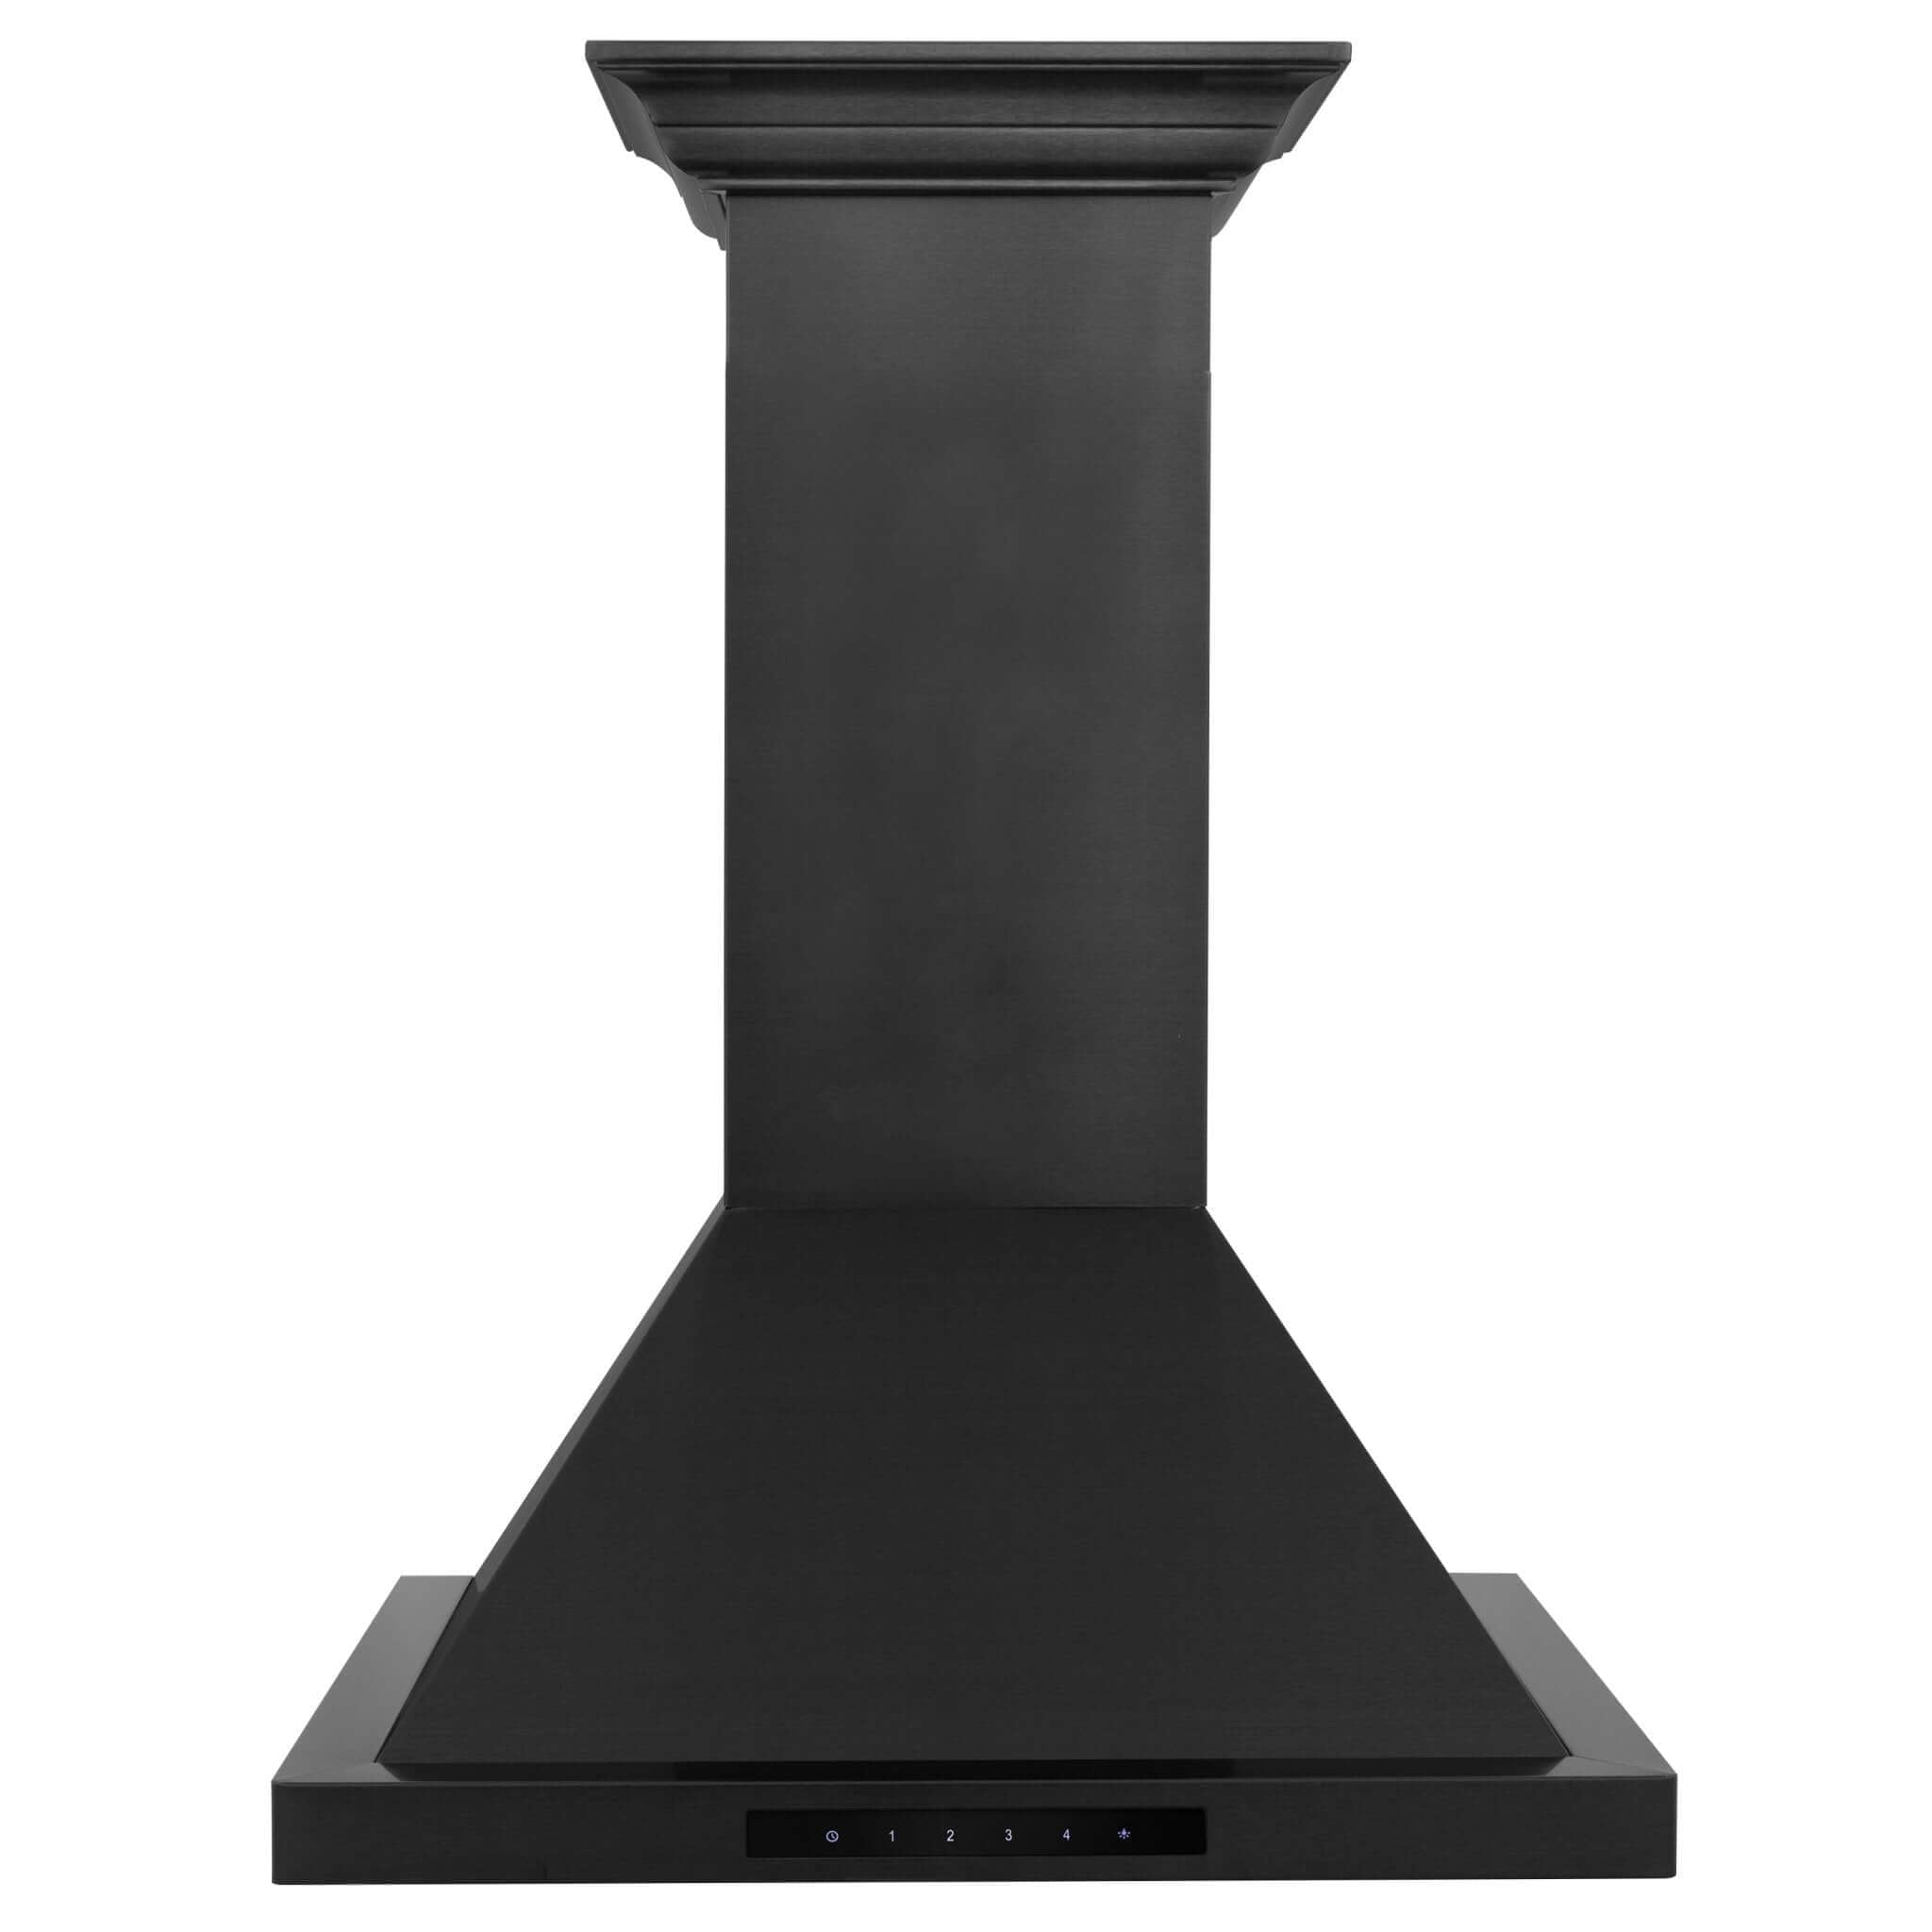 ZLINE Convertible Vent Wall Mount Range Hood in Black Stainless Steel with Crown Molding (BSKBNCRN) front